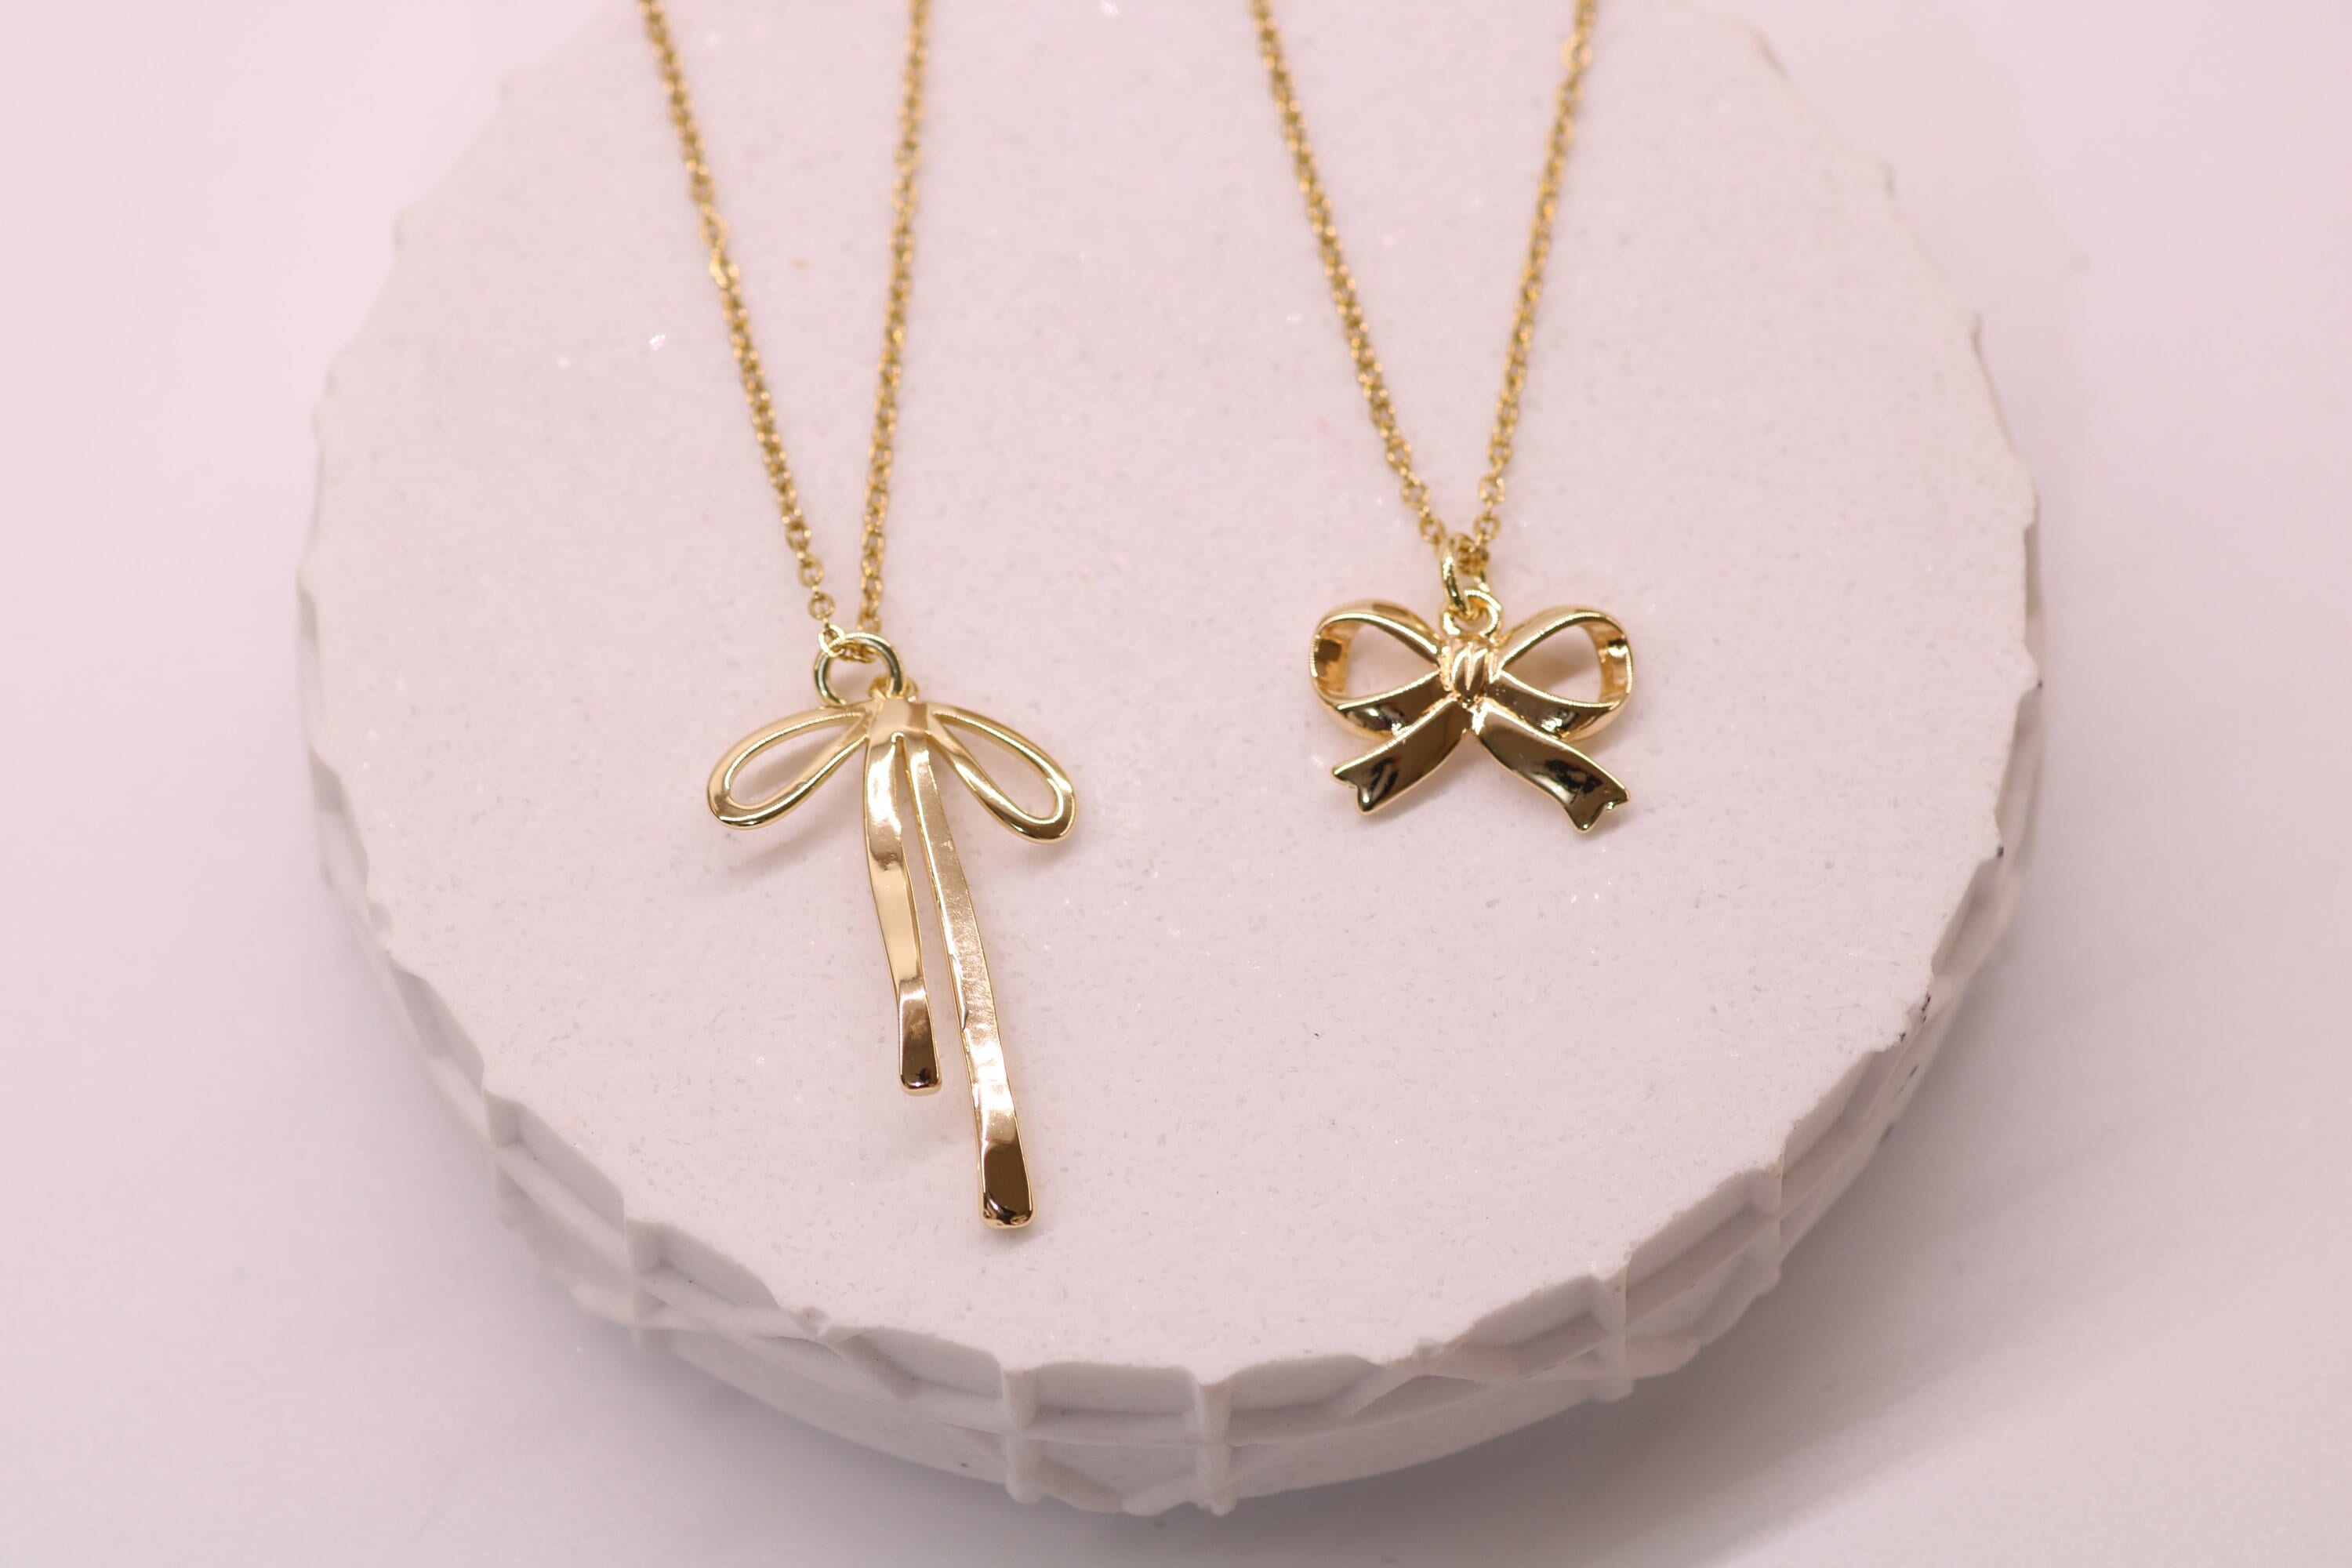 BrandHabit: Prettiest Ribbon Tie Necklaces from Luxe to Less